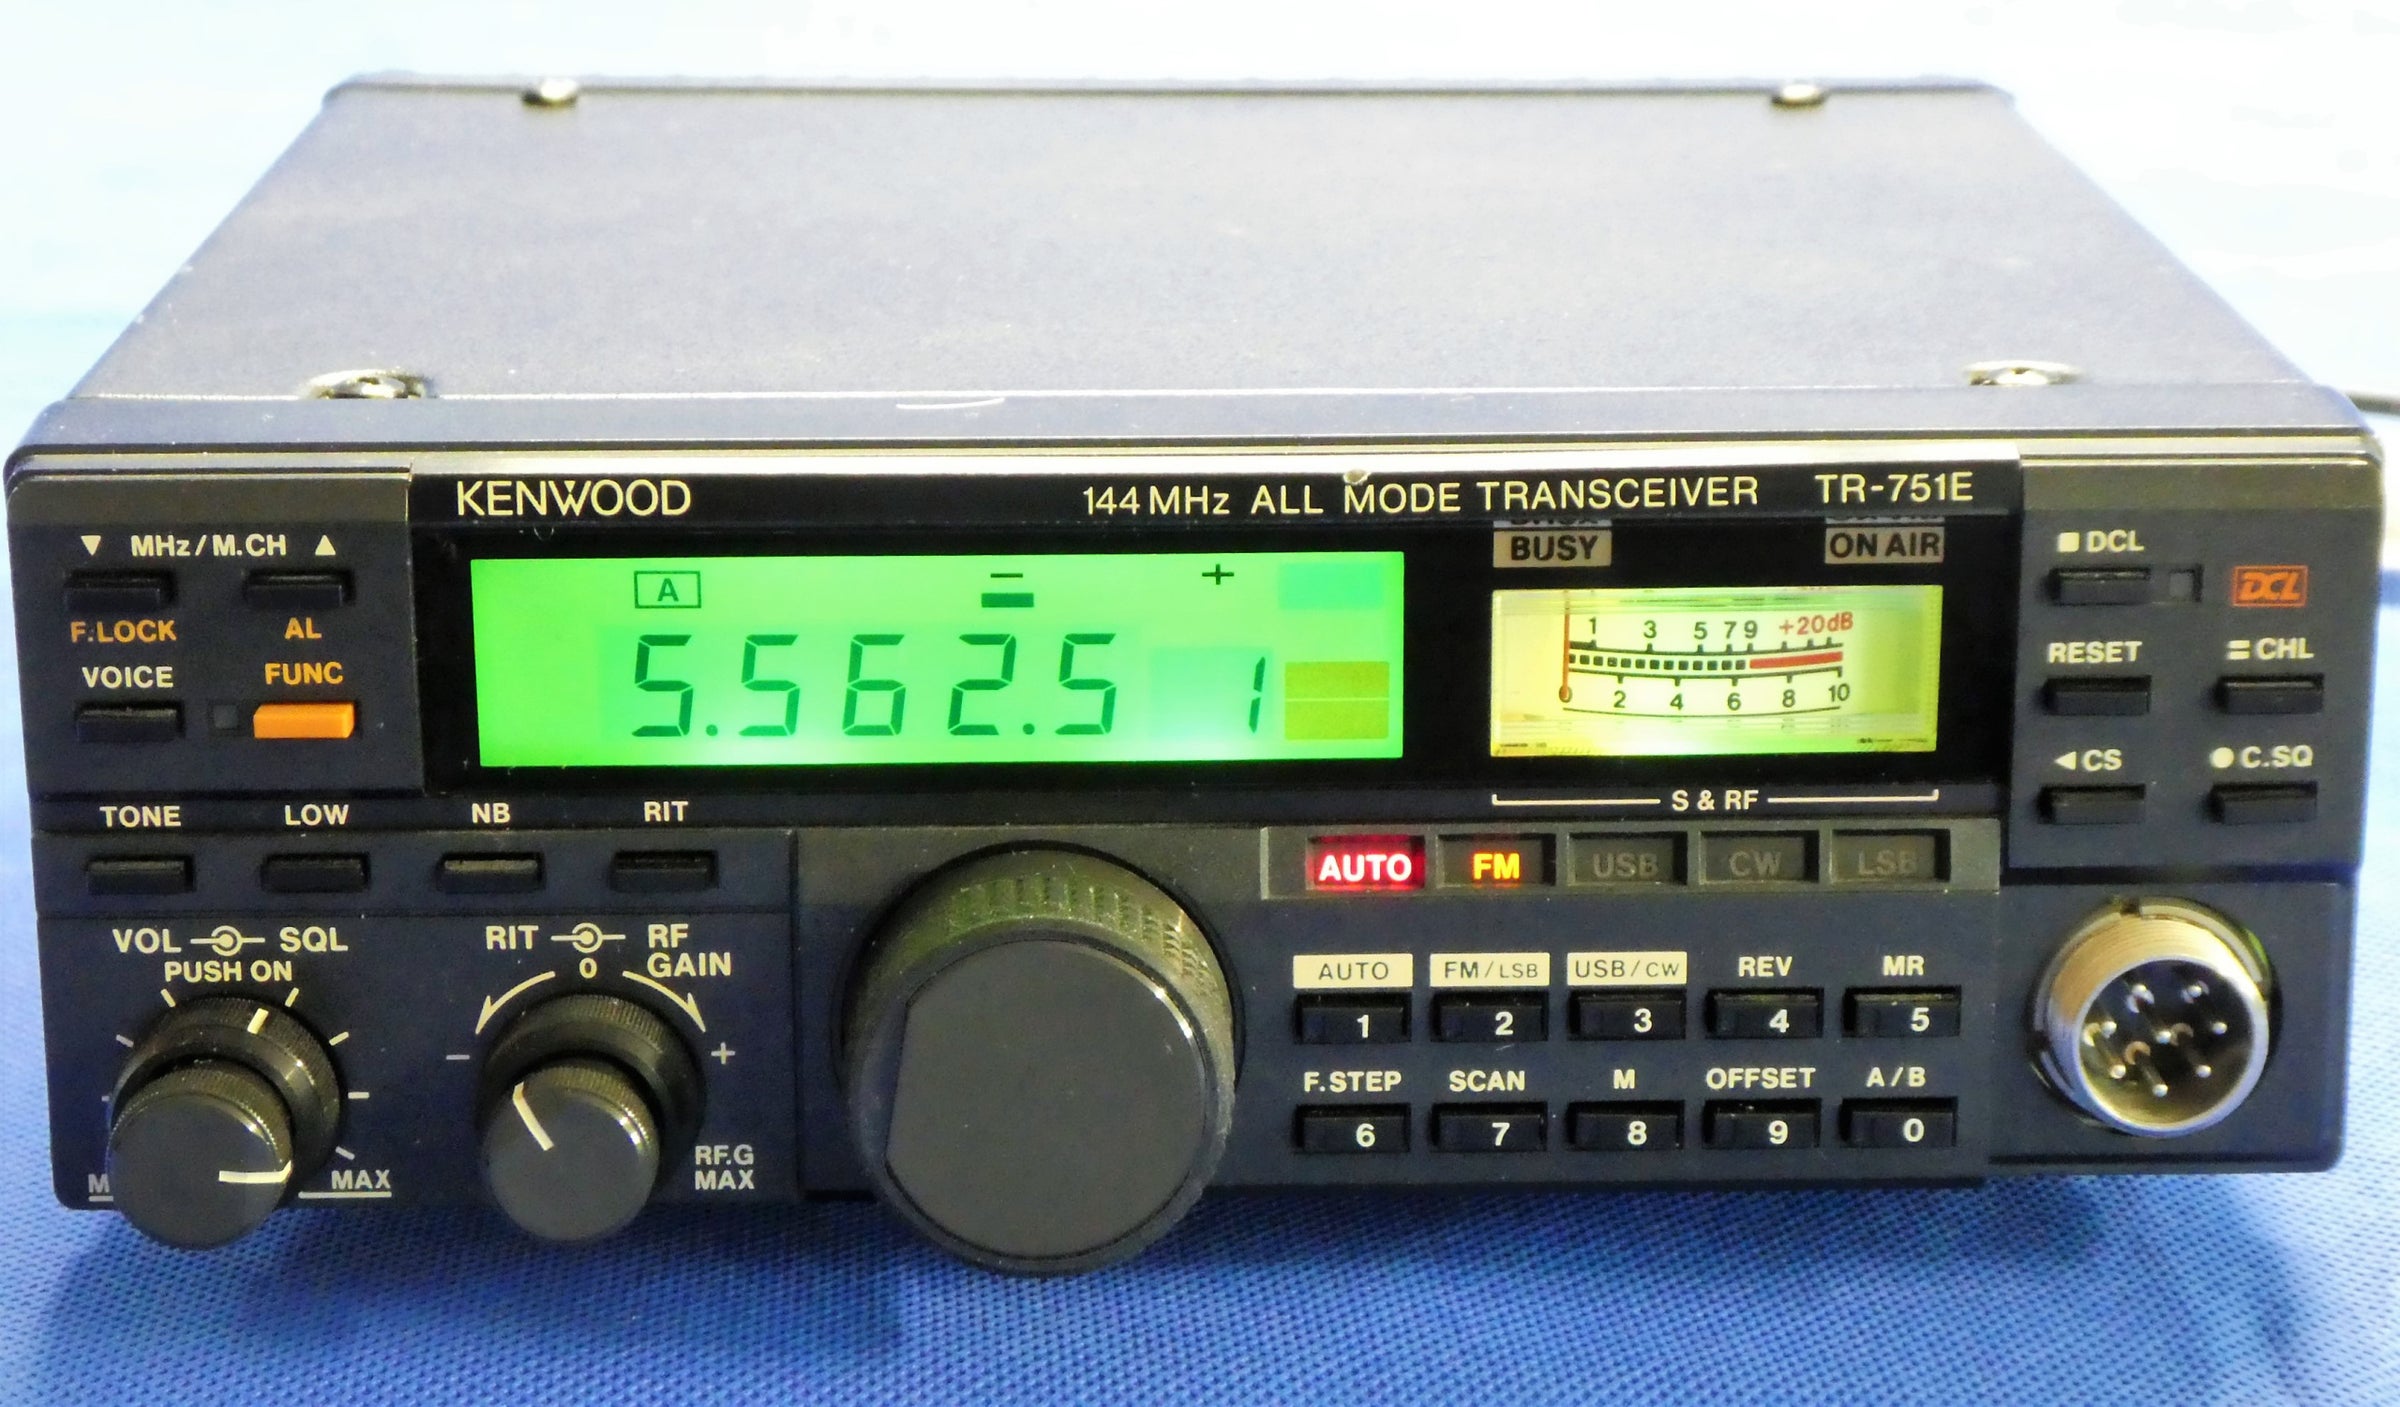 Kenwood TR-751E 2M Multimode Transceiver with/without CTCSS - 3 